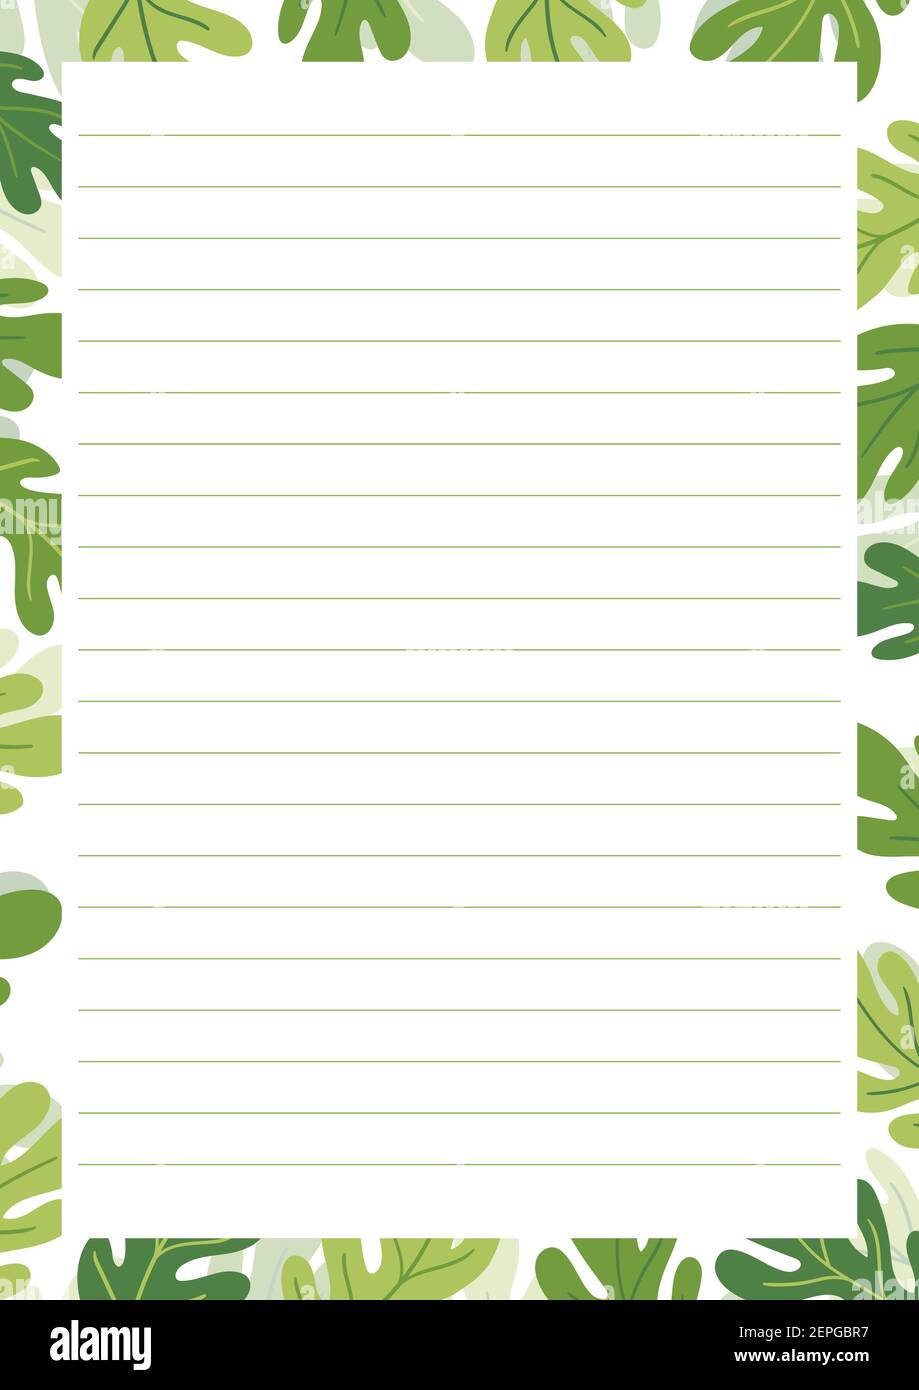 85,226 Lined Paper A4 Images, Stock Photos, 3D objects, & Vectors